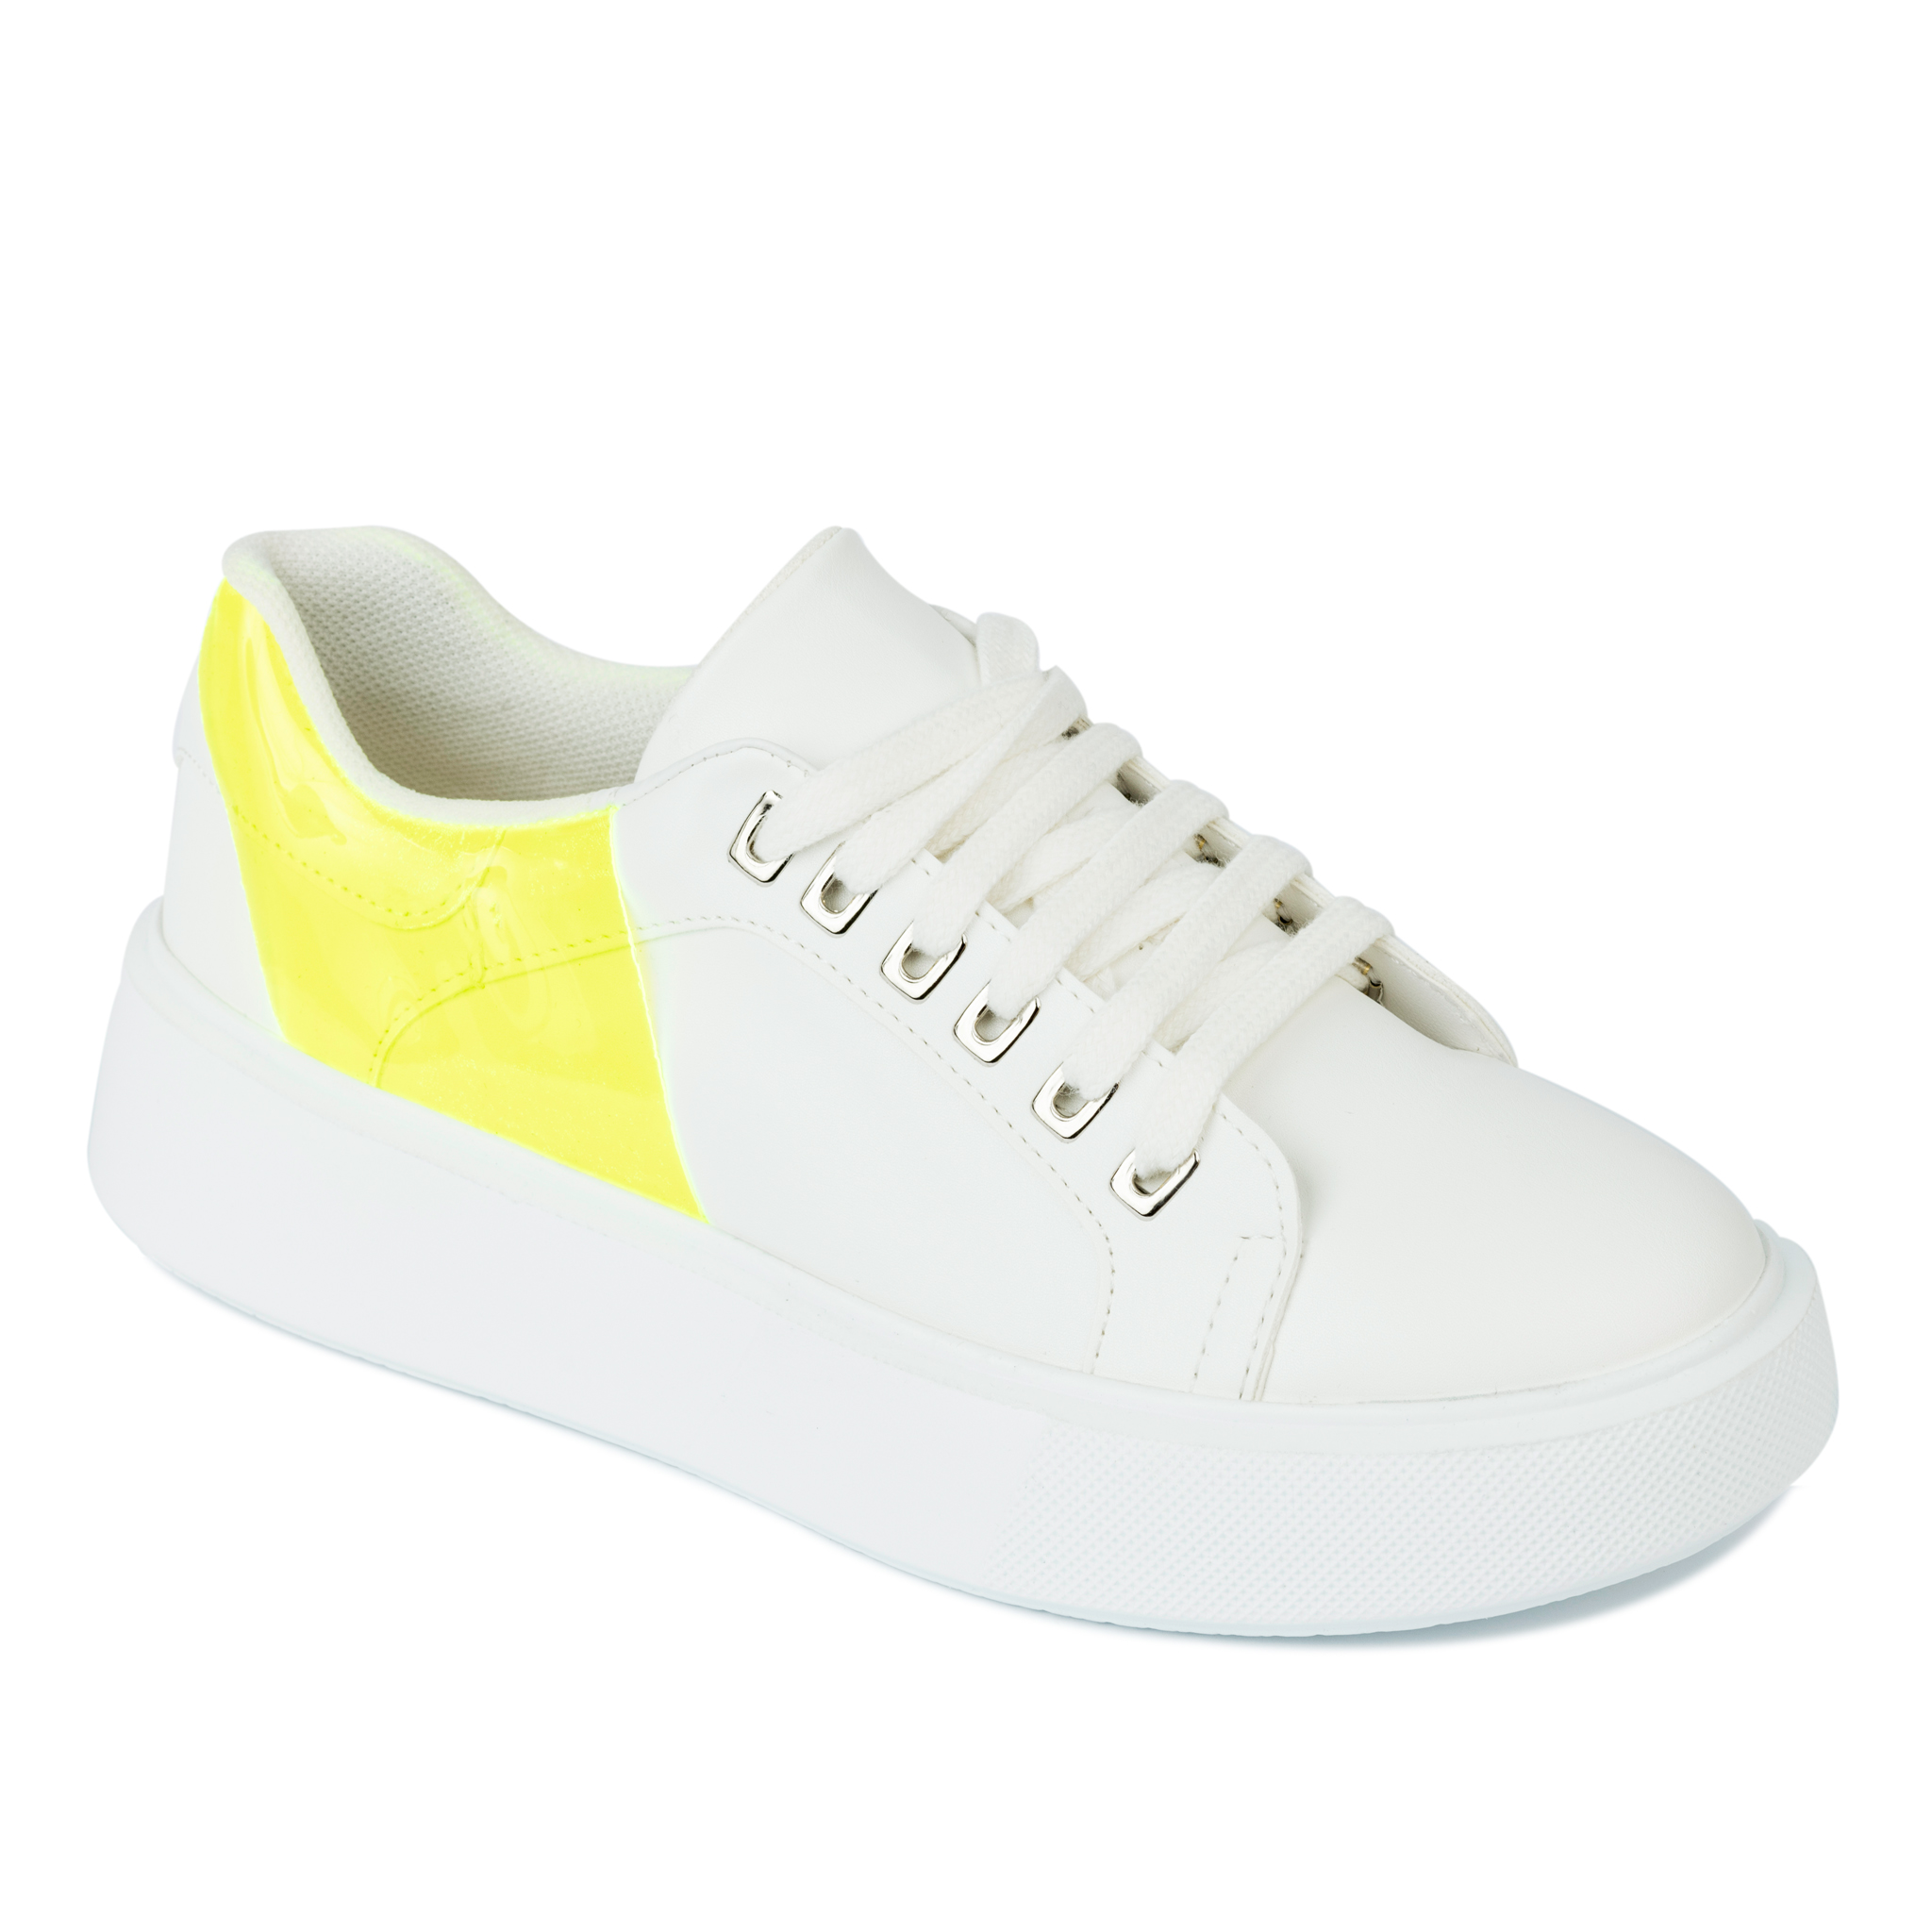 HIGH SOLE SNEAKERS - WHITE/YELLOW